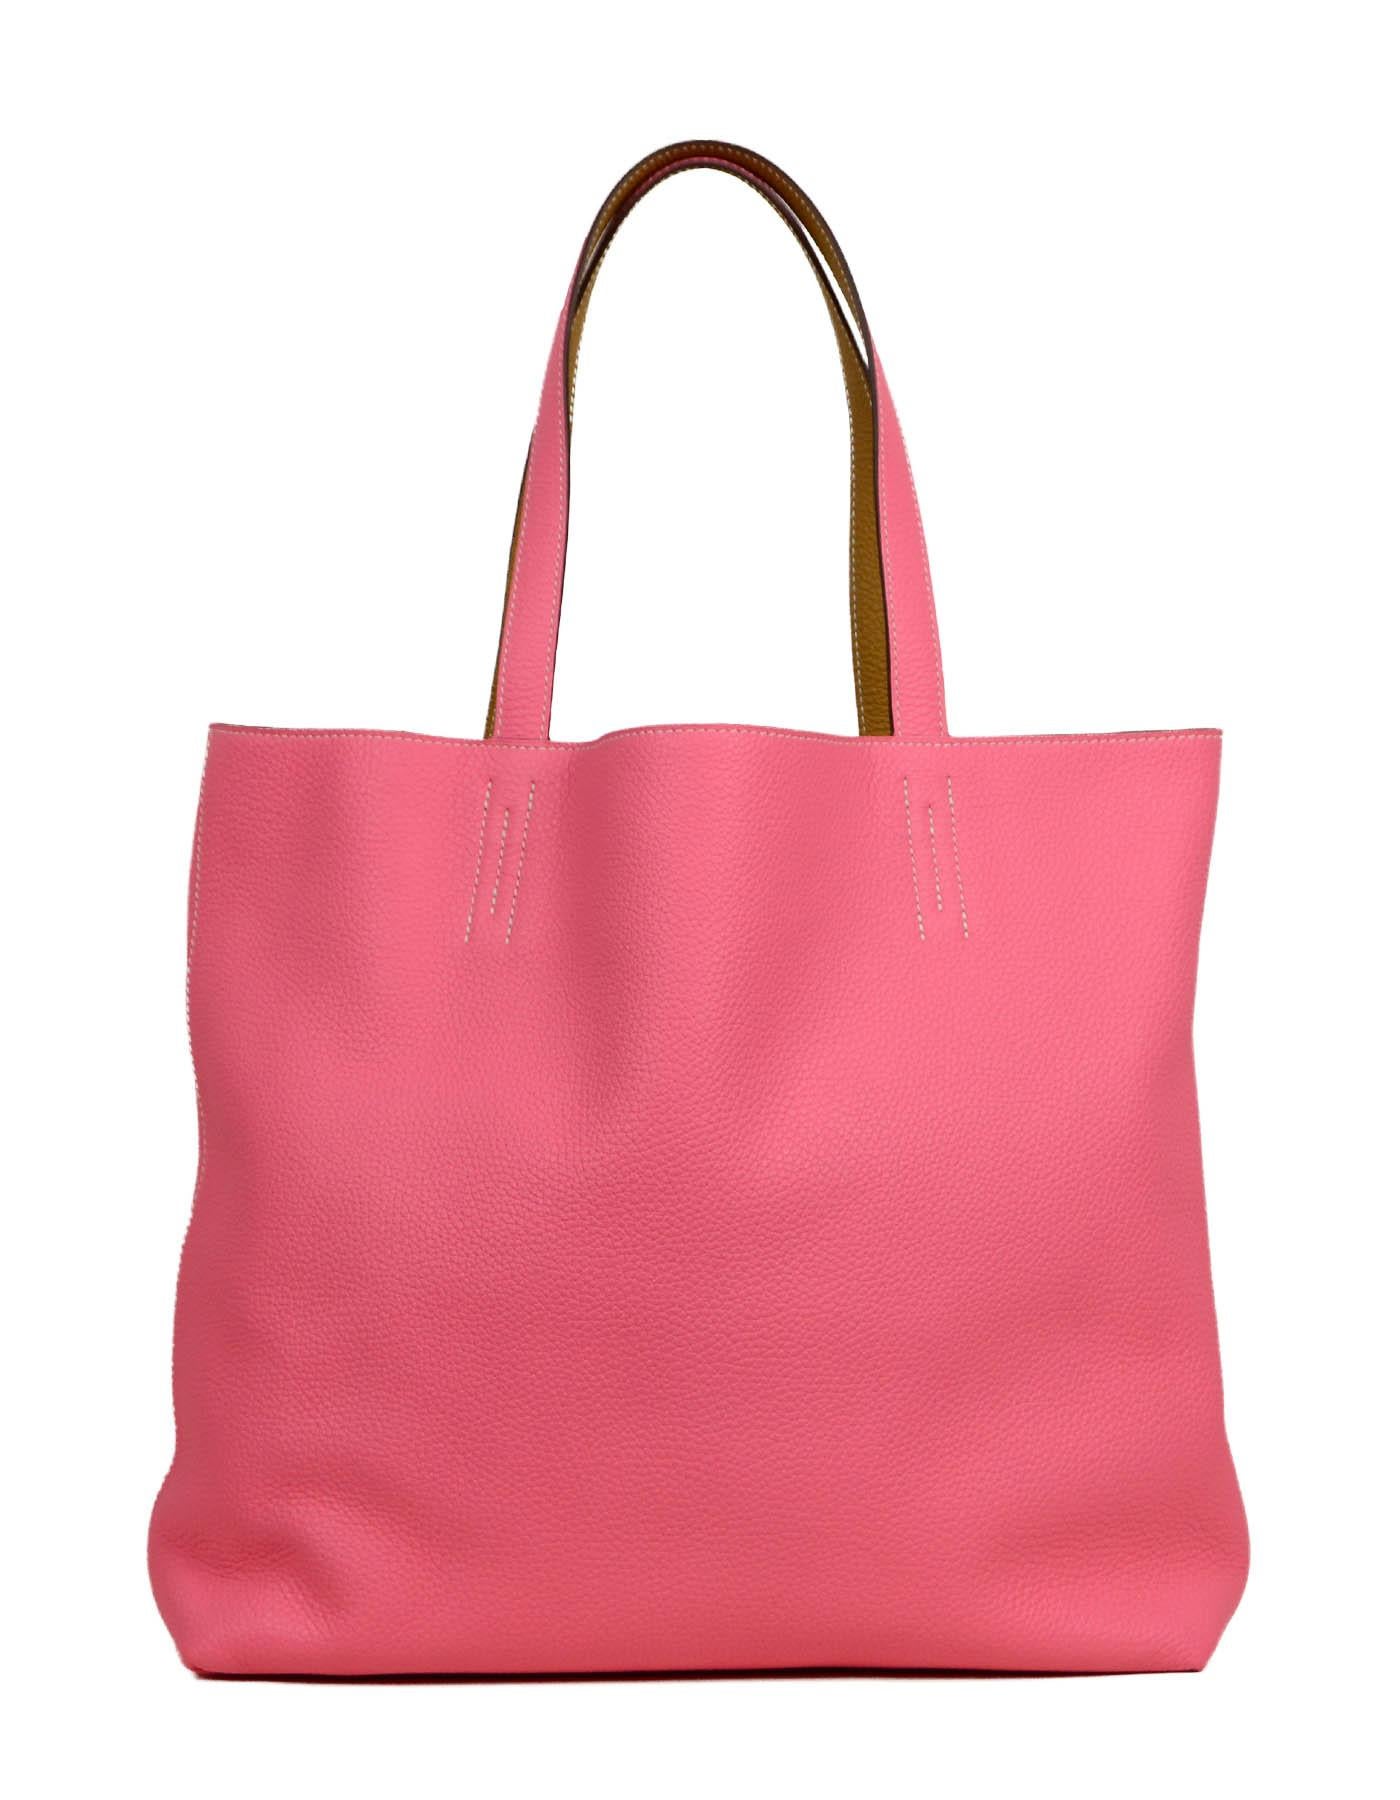 Hermes Rose Azalee/ Sesame Reversible Taurillon Clemence Leather Double Sens 36 Tote Bag

Made In: France
Year of Production: 2020
Color: Roze azalee pink and sesame camel
Hardware: None
Materials: Taurillon clemence leather
Lining: Taurillon